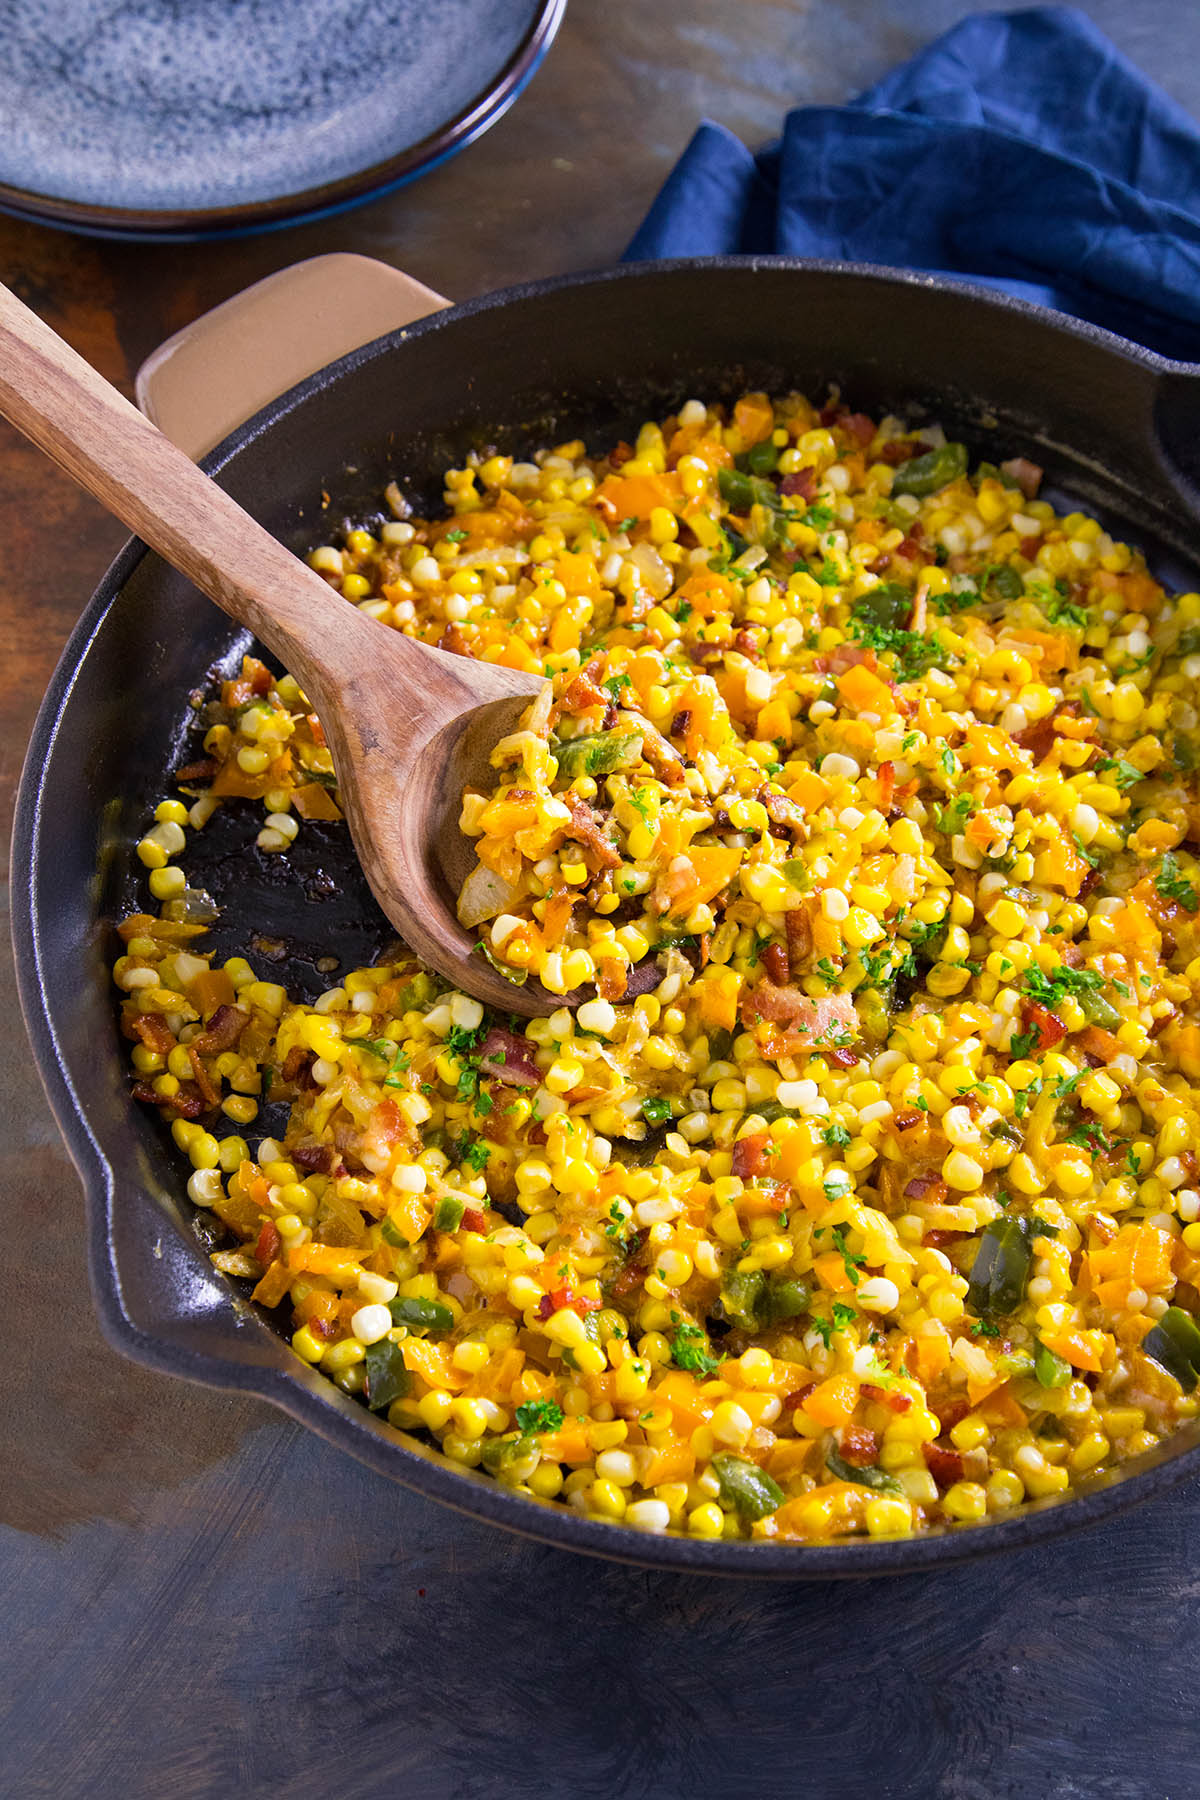 Cajun Maque Choux is a classic southern dish of bacon, corn and peppers with a bit of cream.